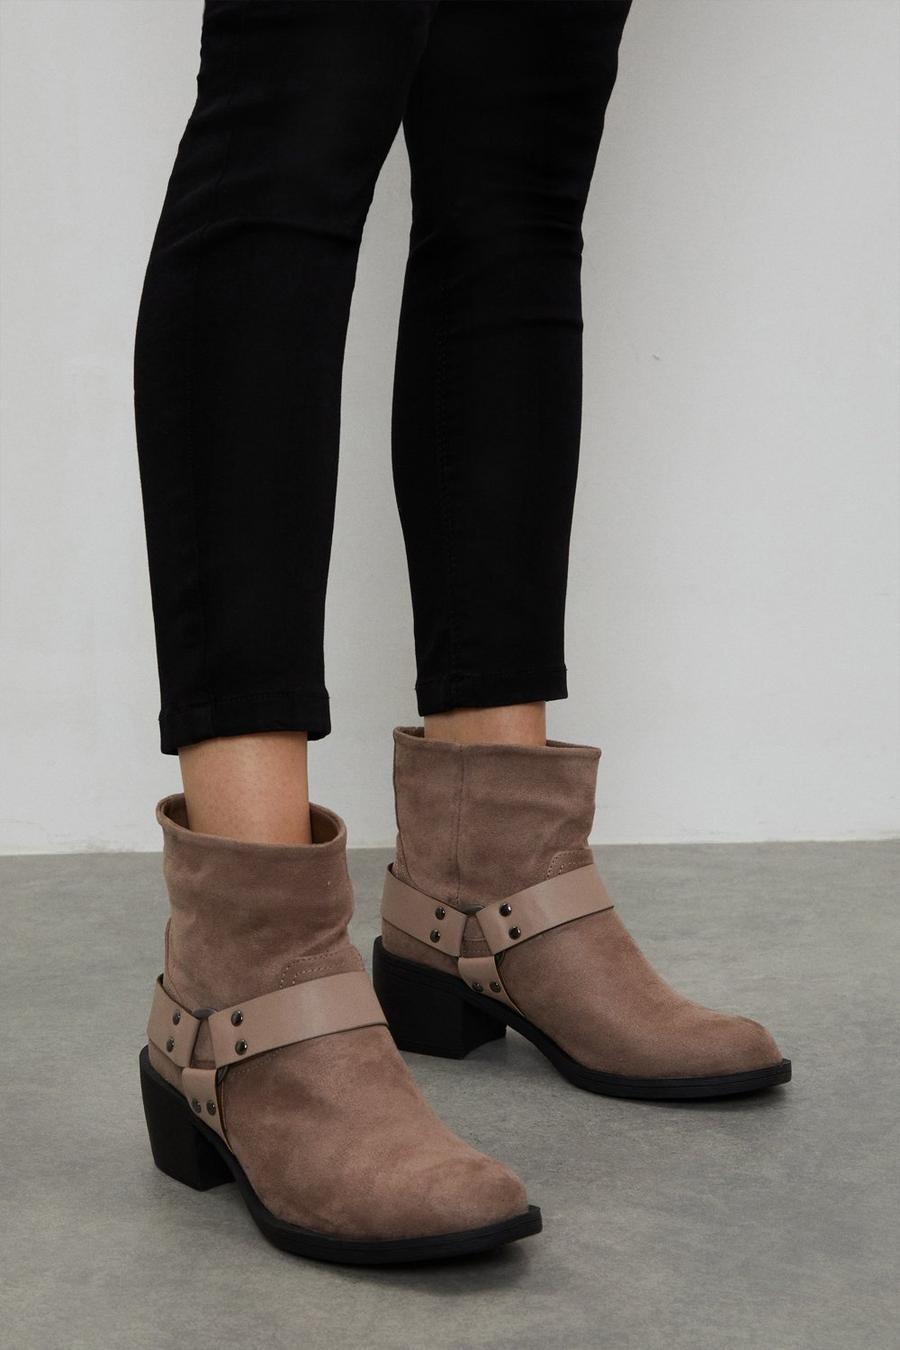 Good For The Sole Footwear: Mariah Comfort Western Ankle Boots